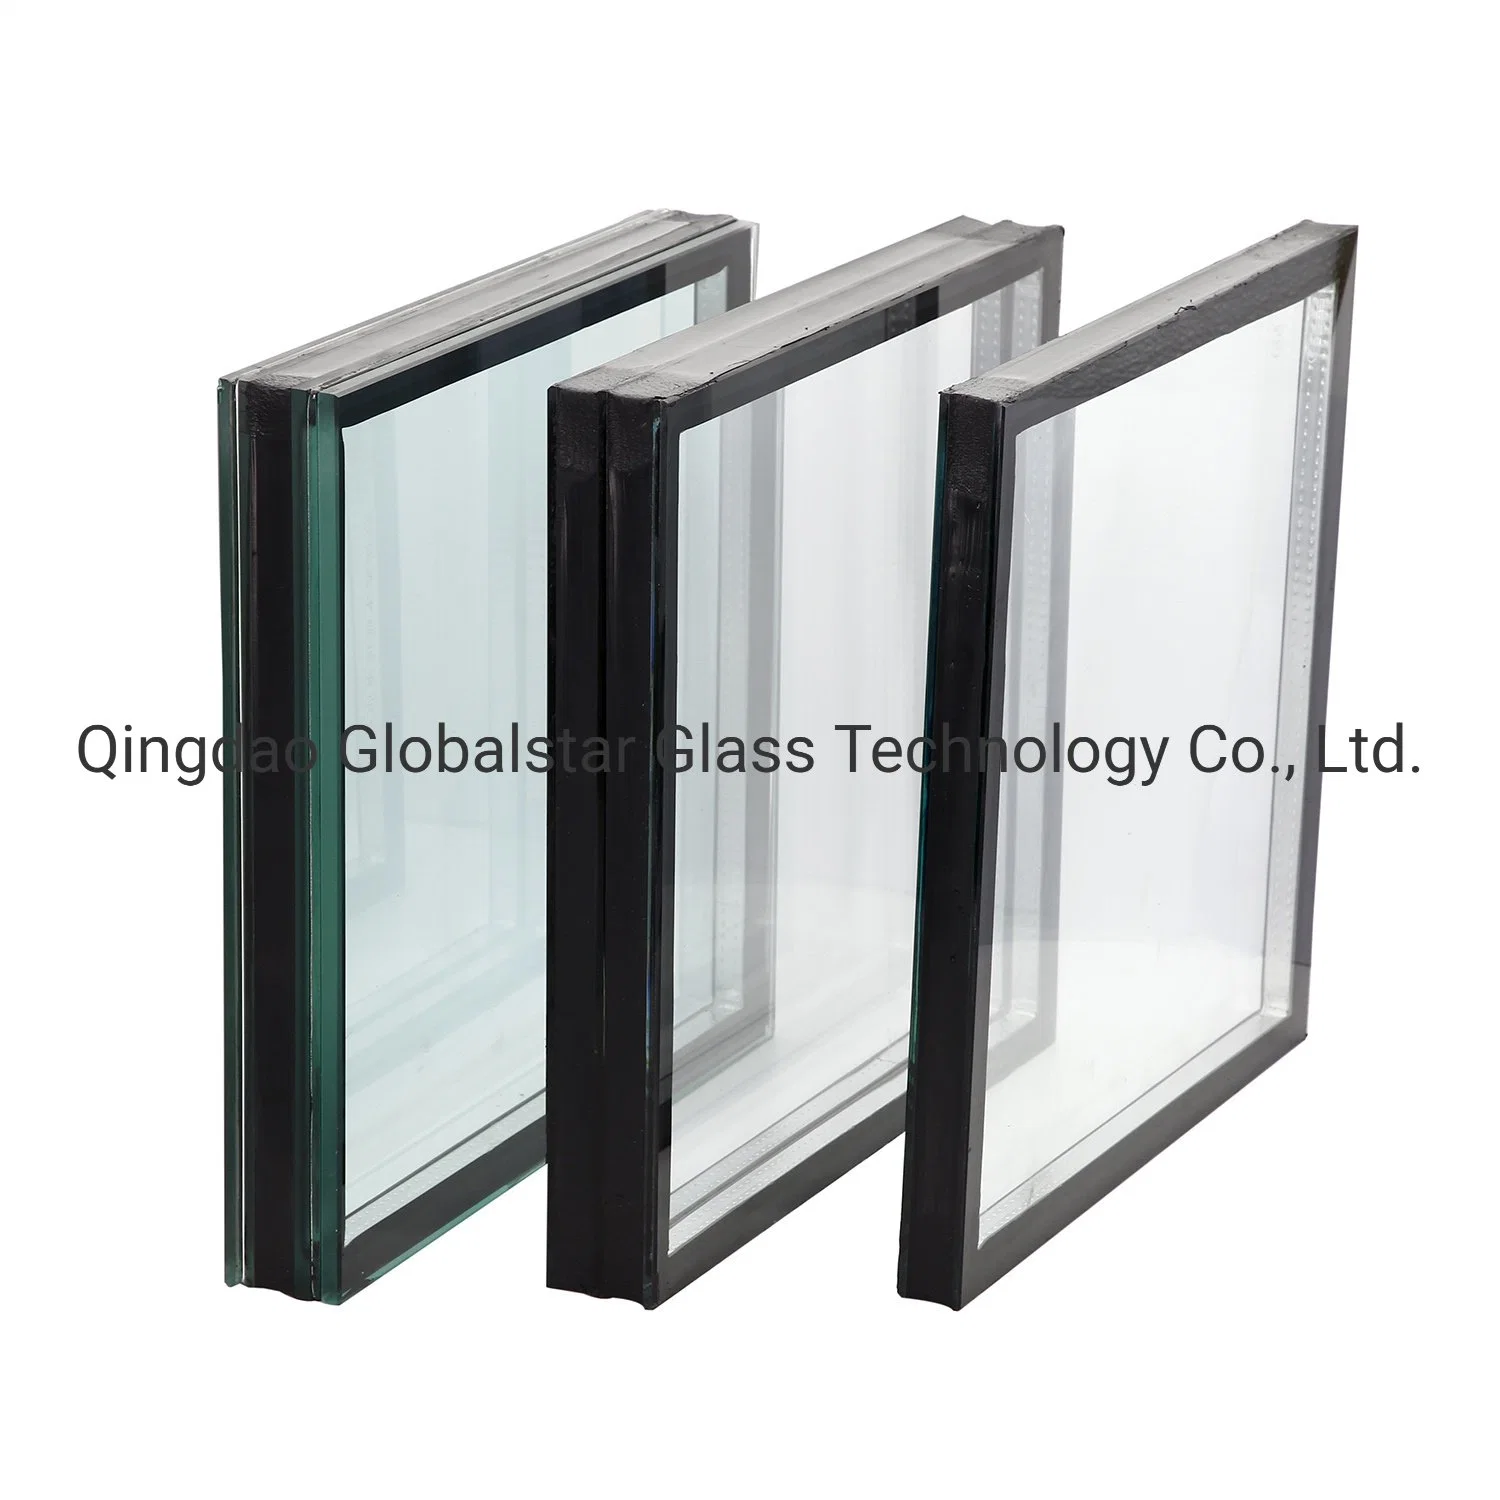 4+12A+4mm Double Glazing Glass/ Insulated Glass/ Window Glass/ Igu Glass/ Clear Glass/ Low E Glass/ Tempered Glass/Toughened Glass